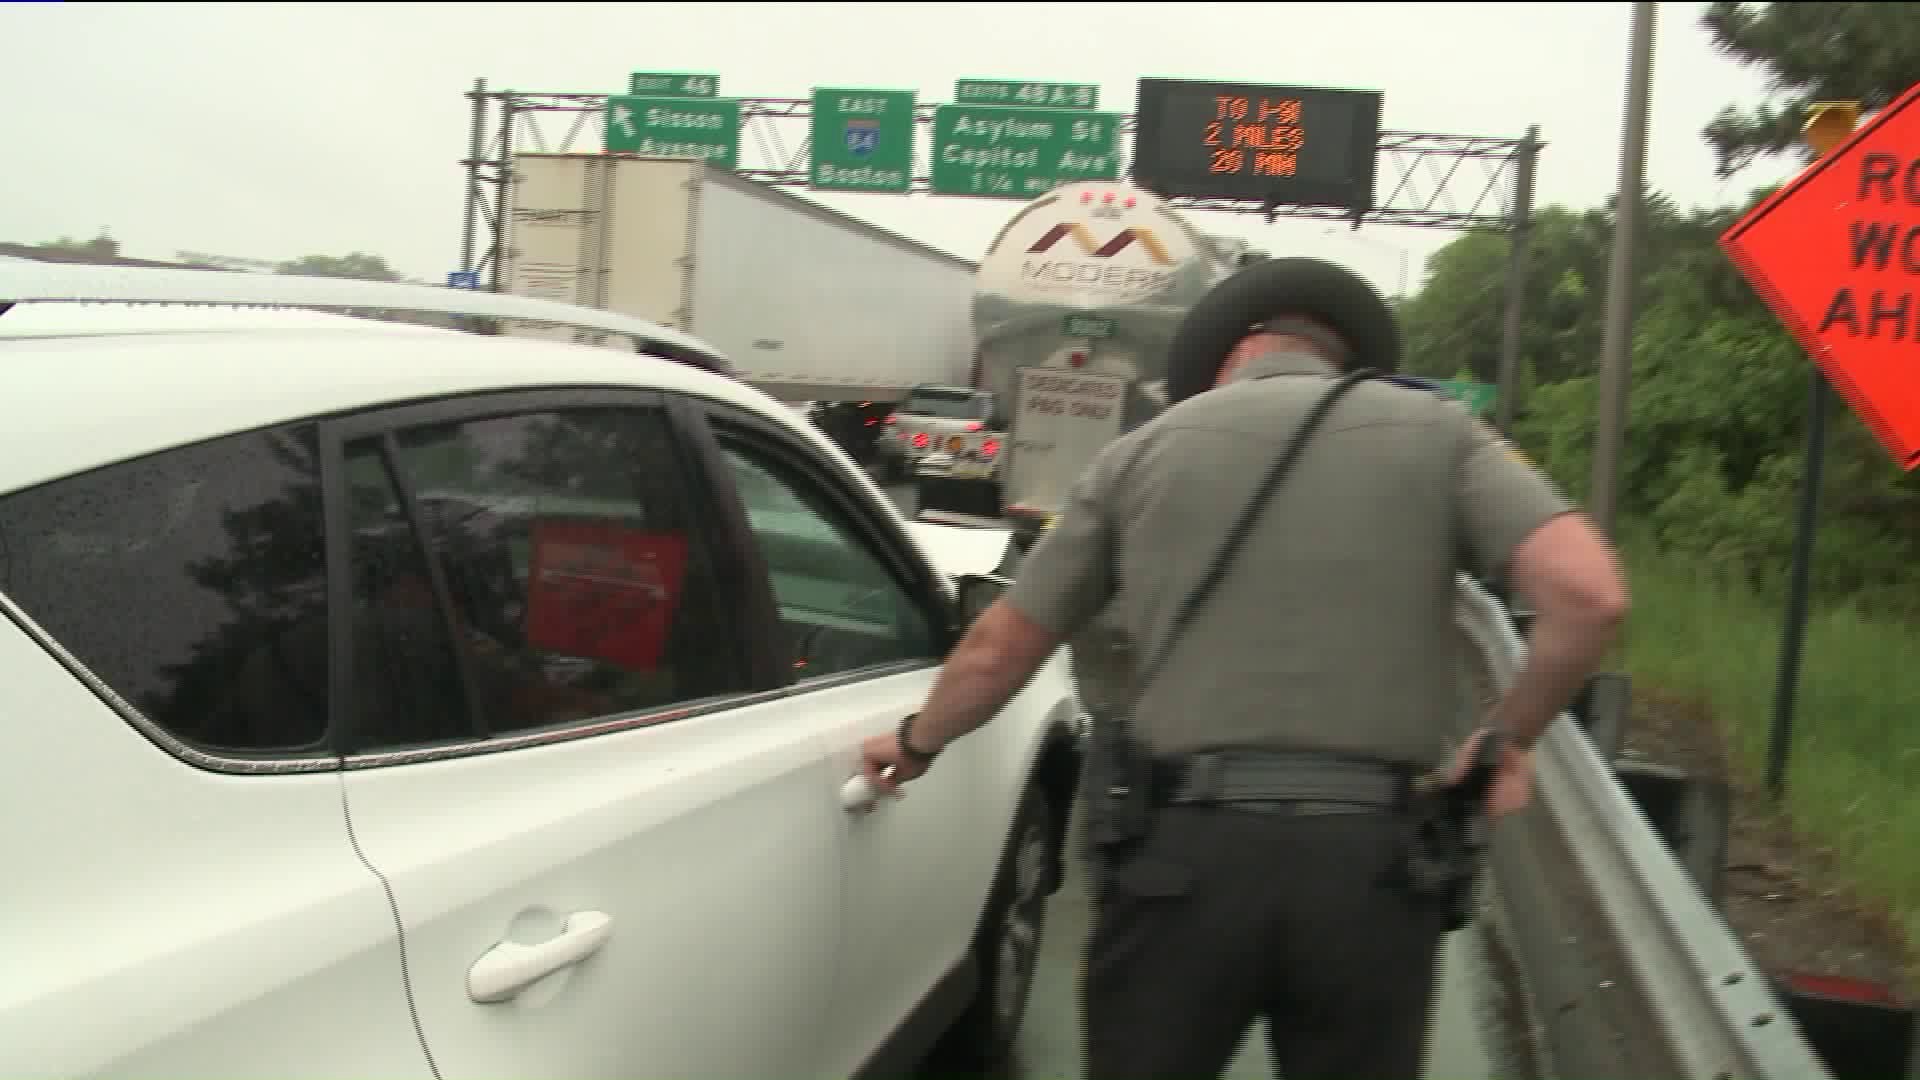 Police preparing for heavy traffic heading into Memorial Day weekend